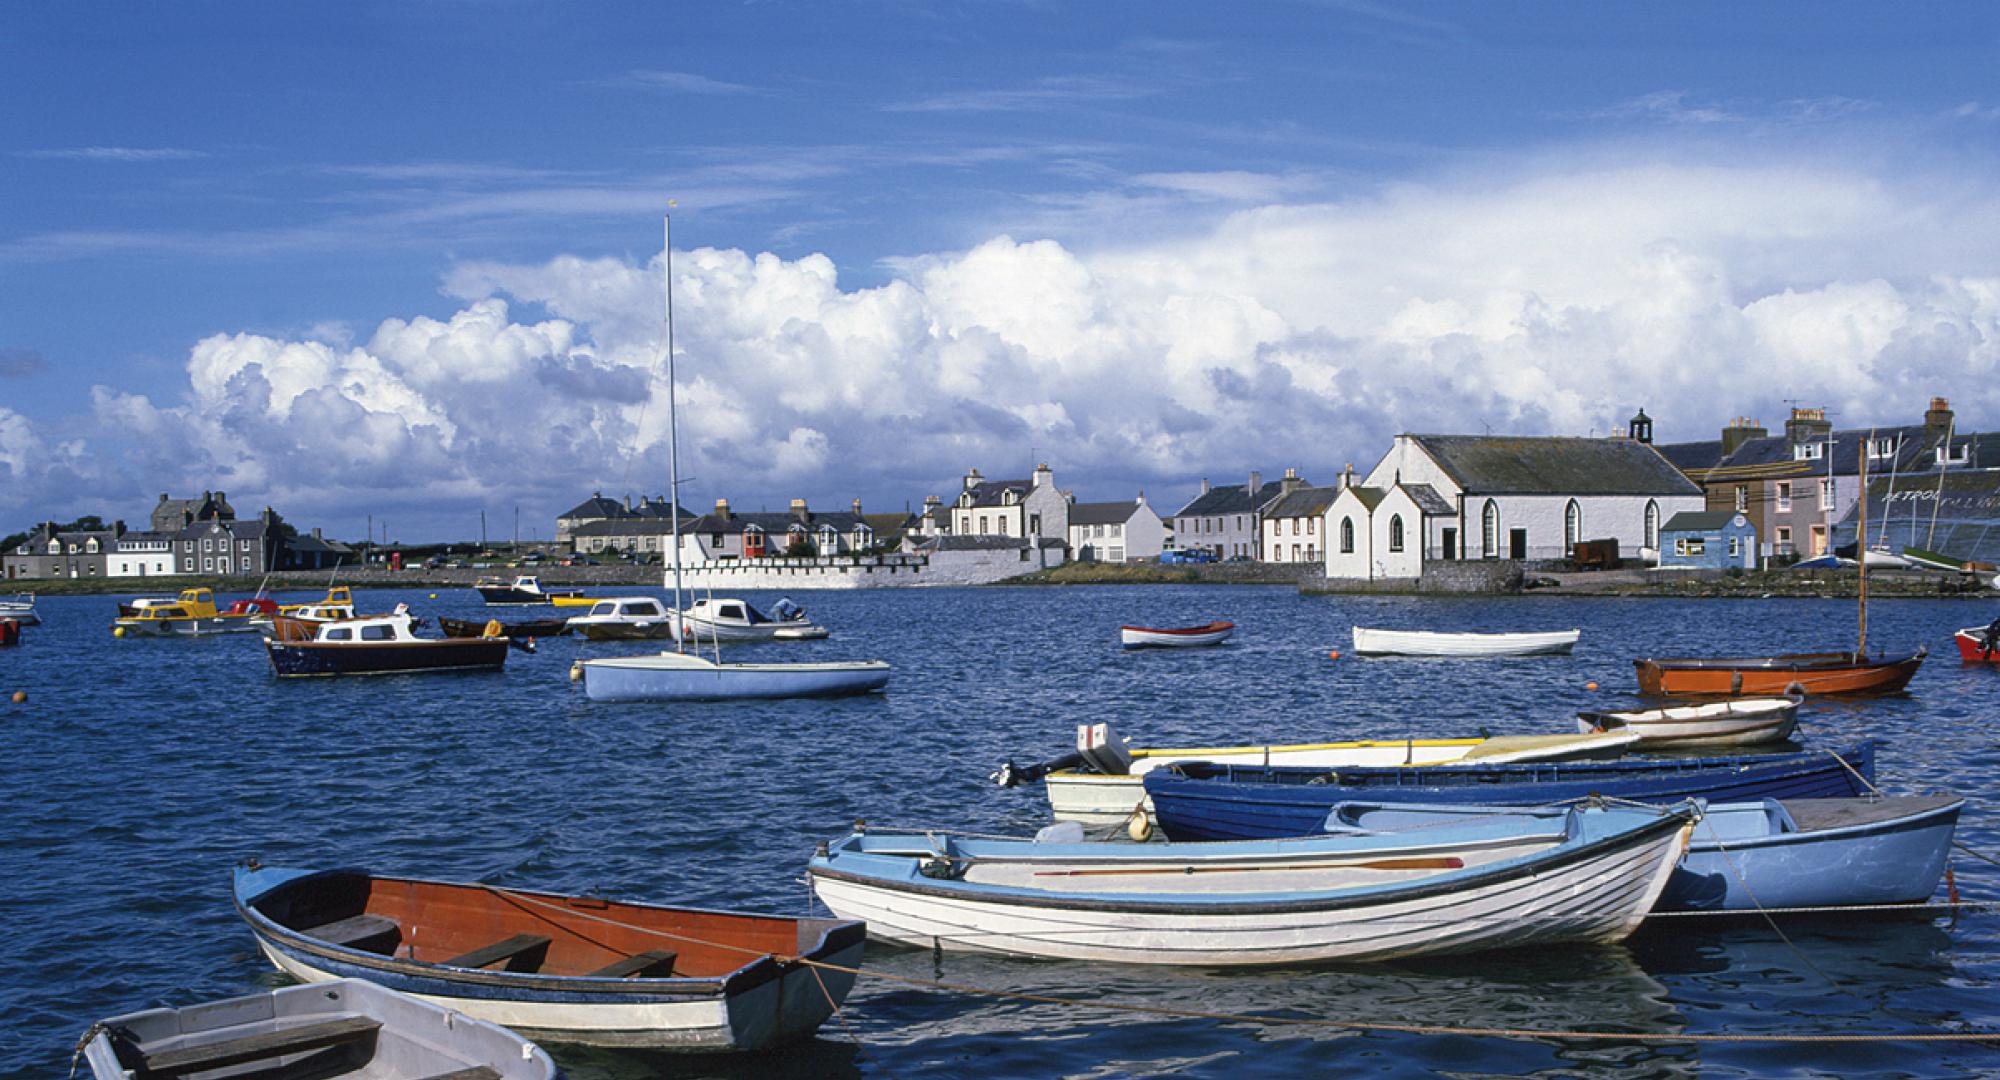 View of boats on the water at Whithorn on a sunny day